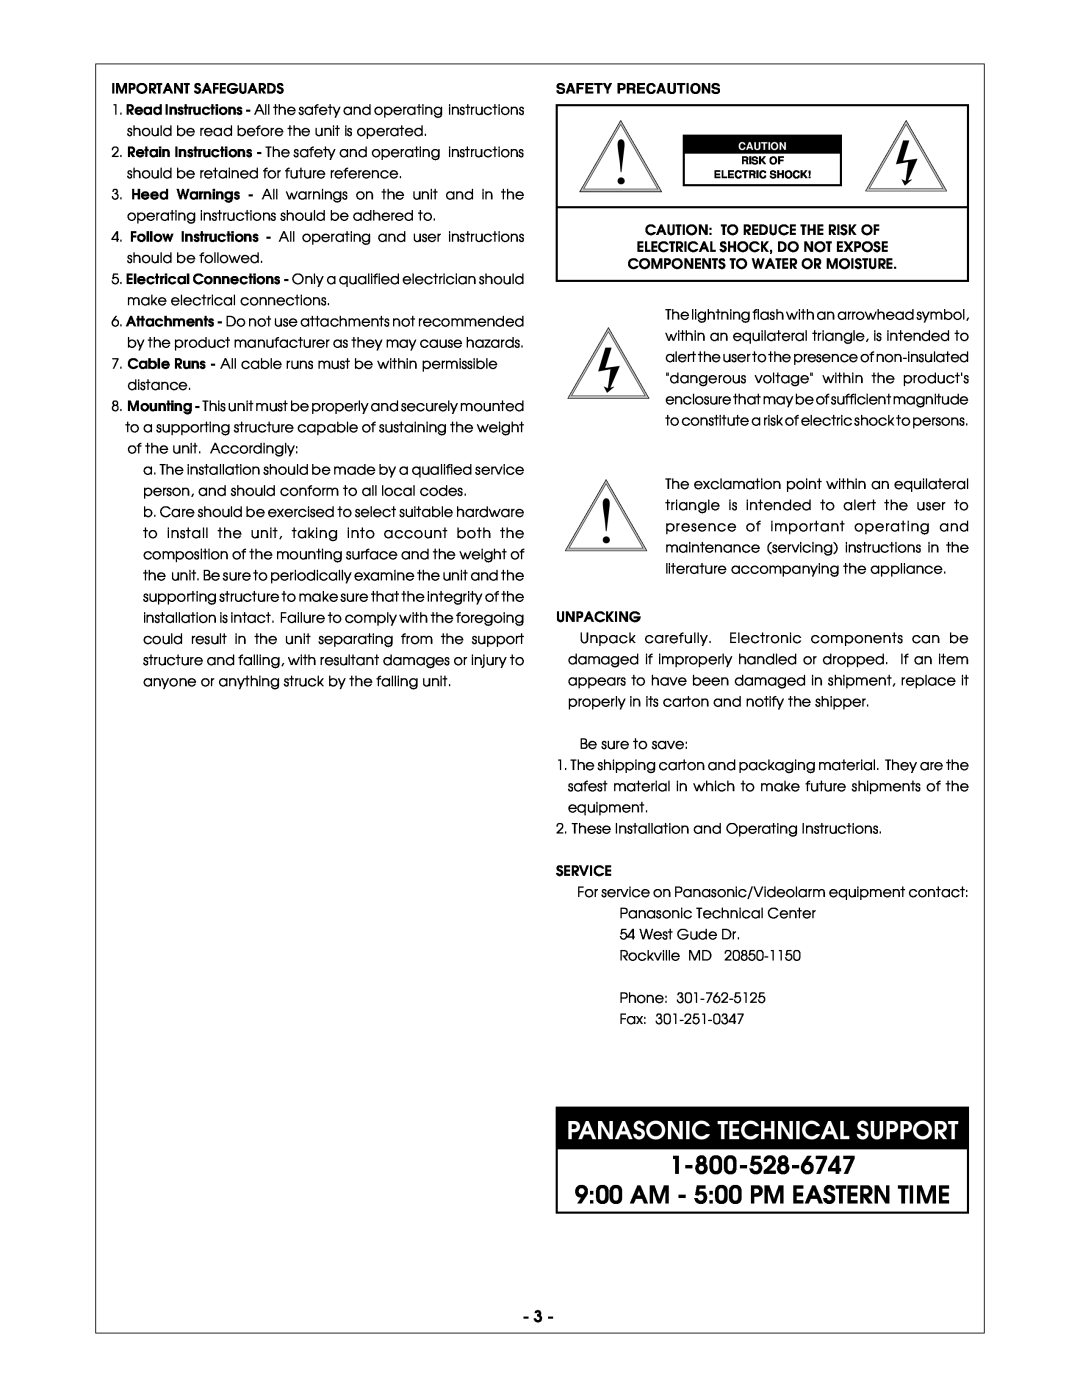 Panasonic PCV3, PCF3 manual Panasonic Technical Support, AM - 500 PM EASTERN TIME, Safety Precautions 